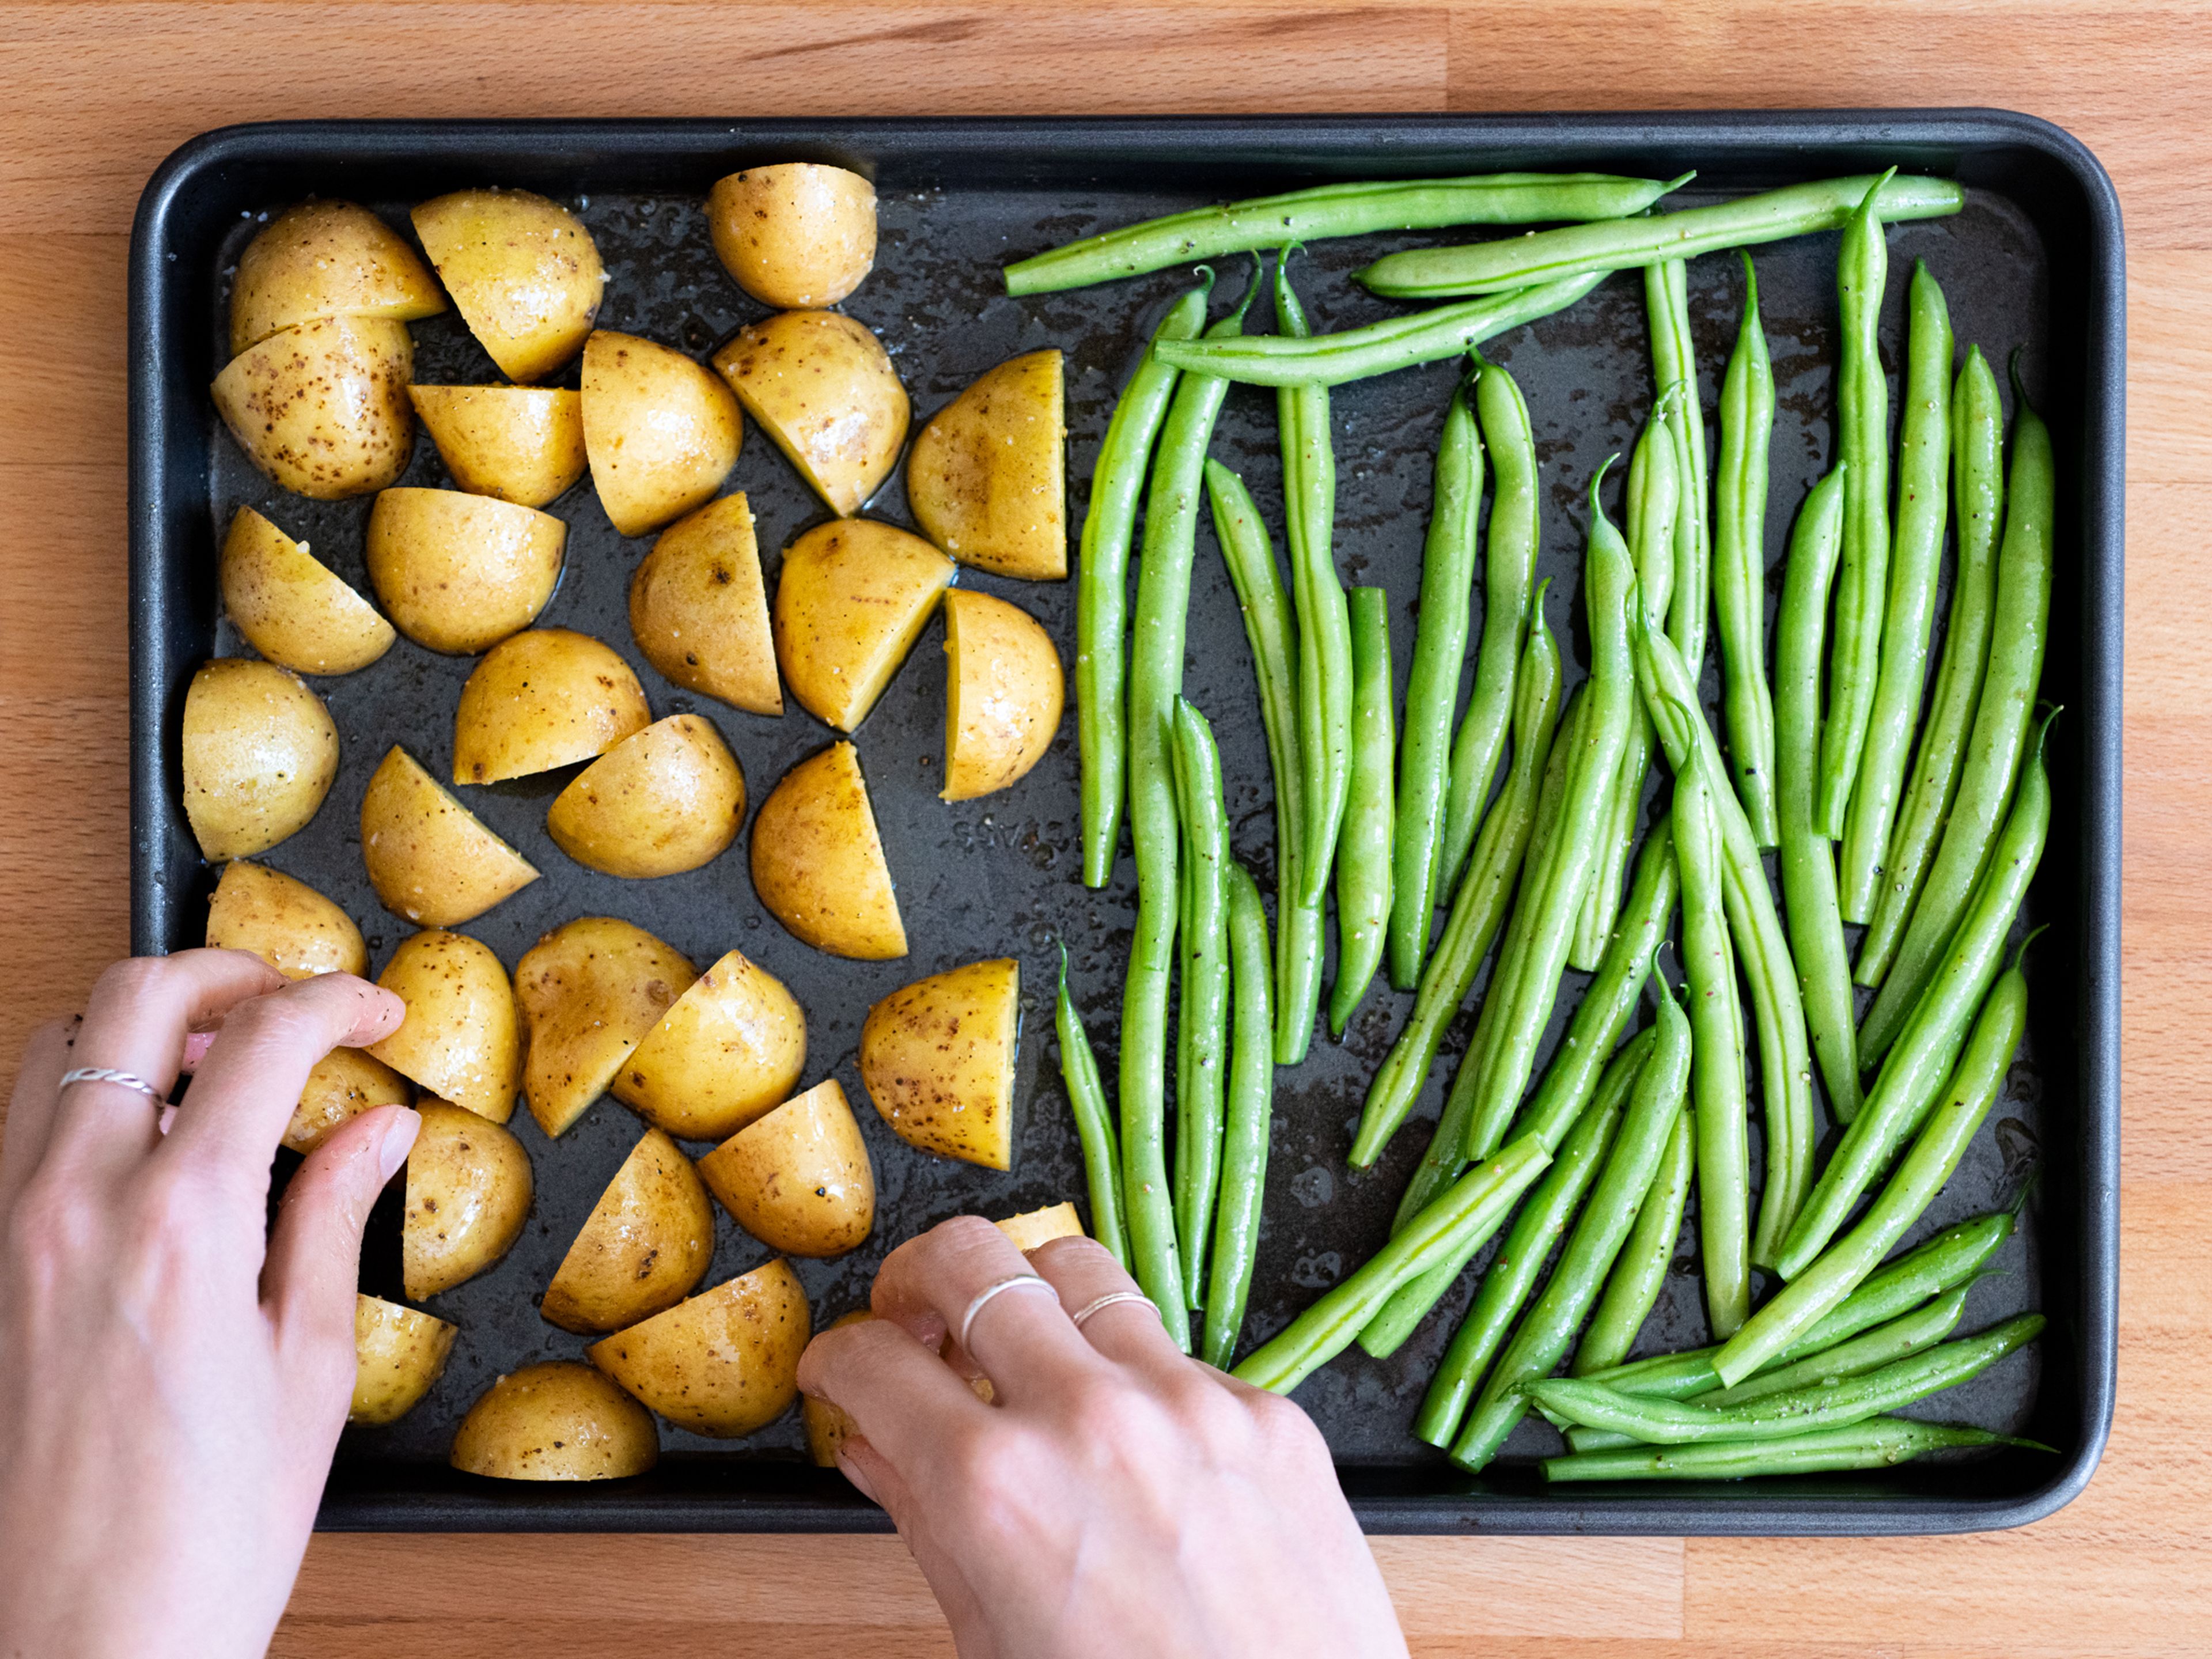 Add green beans and potatoes to a baking sheet. Drizzle with olive oil and season with salt and pepper. Toss to combine, then transfer to the oven and let roast for approx. 20 min., or until green beans are charred and potatoes are a bit browned and crisp on the bottom.